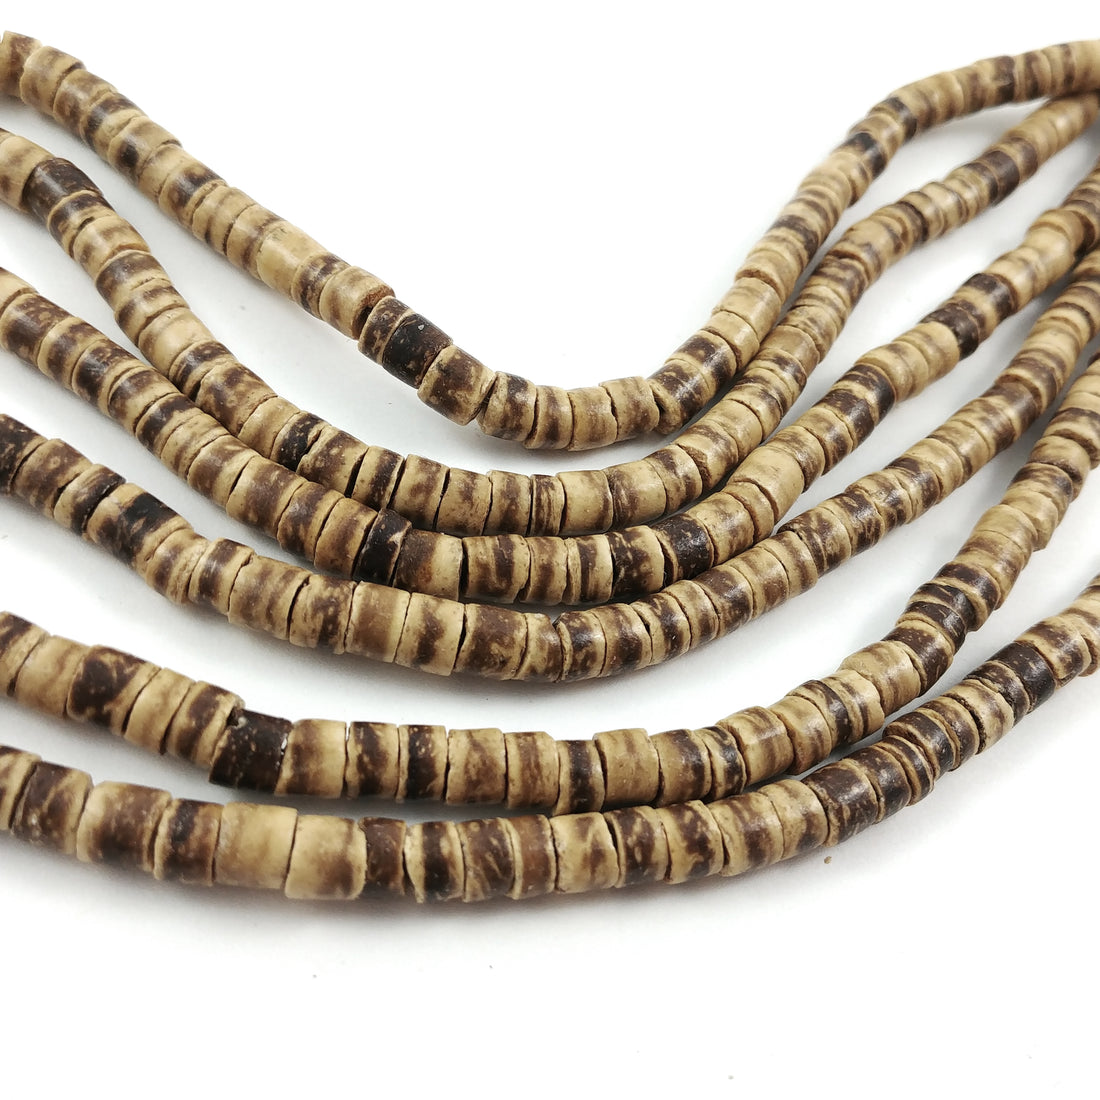 150 Natural beige coconut wood Beads - Donuts Rondelle Disk Heishi Beads 5mm